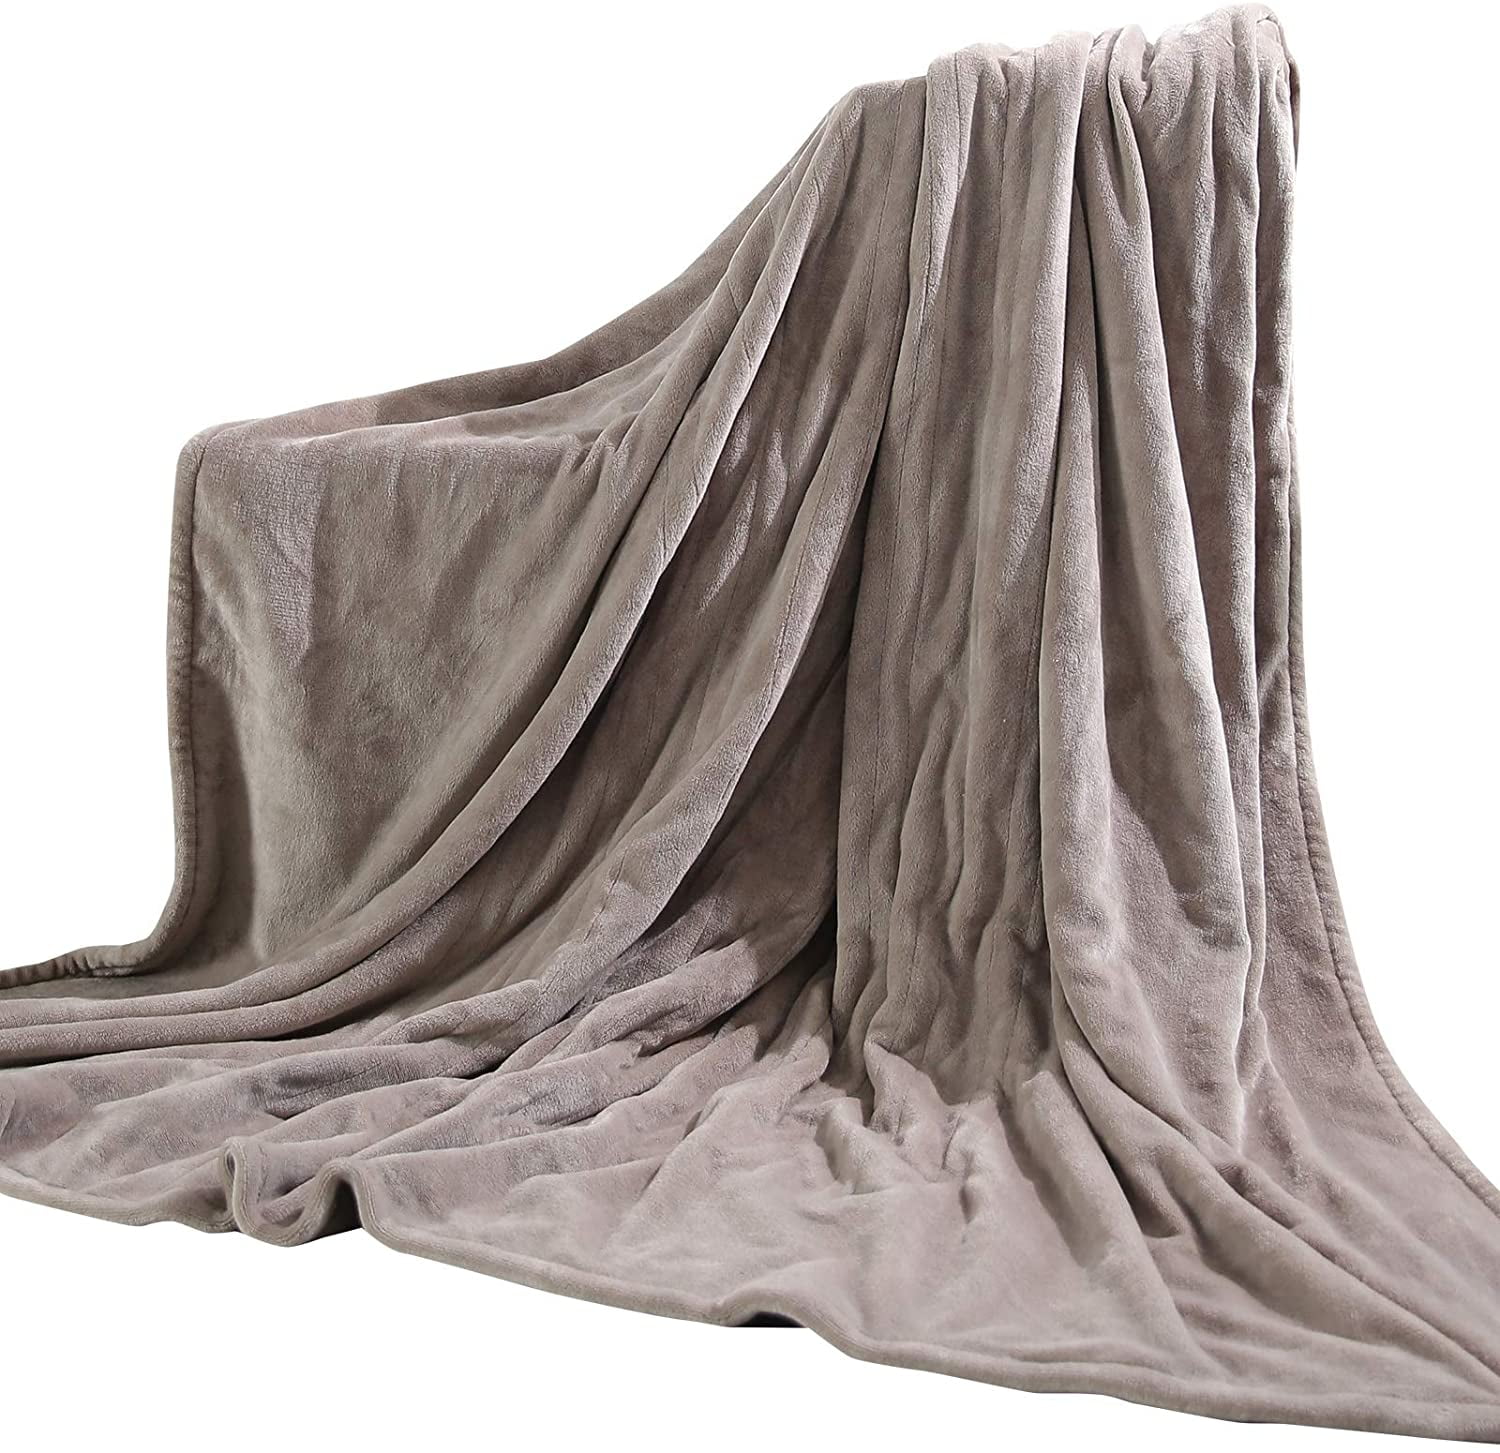 SHINE DOUBLE SIZE ELECTRICAL HEATED UNDER BLANKETS THROW WASHABLE 